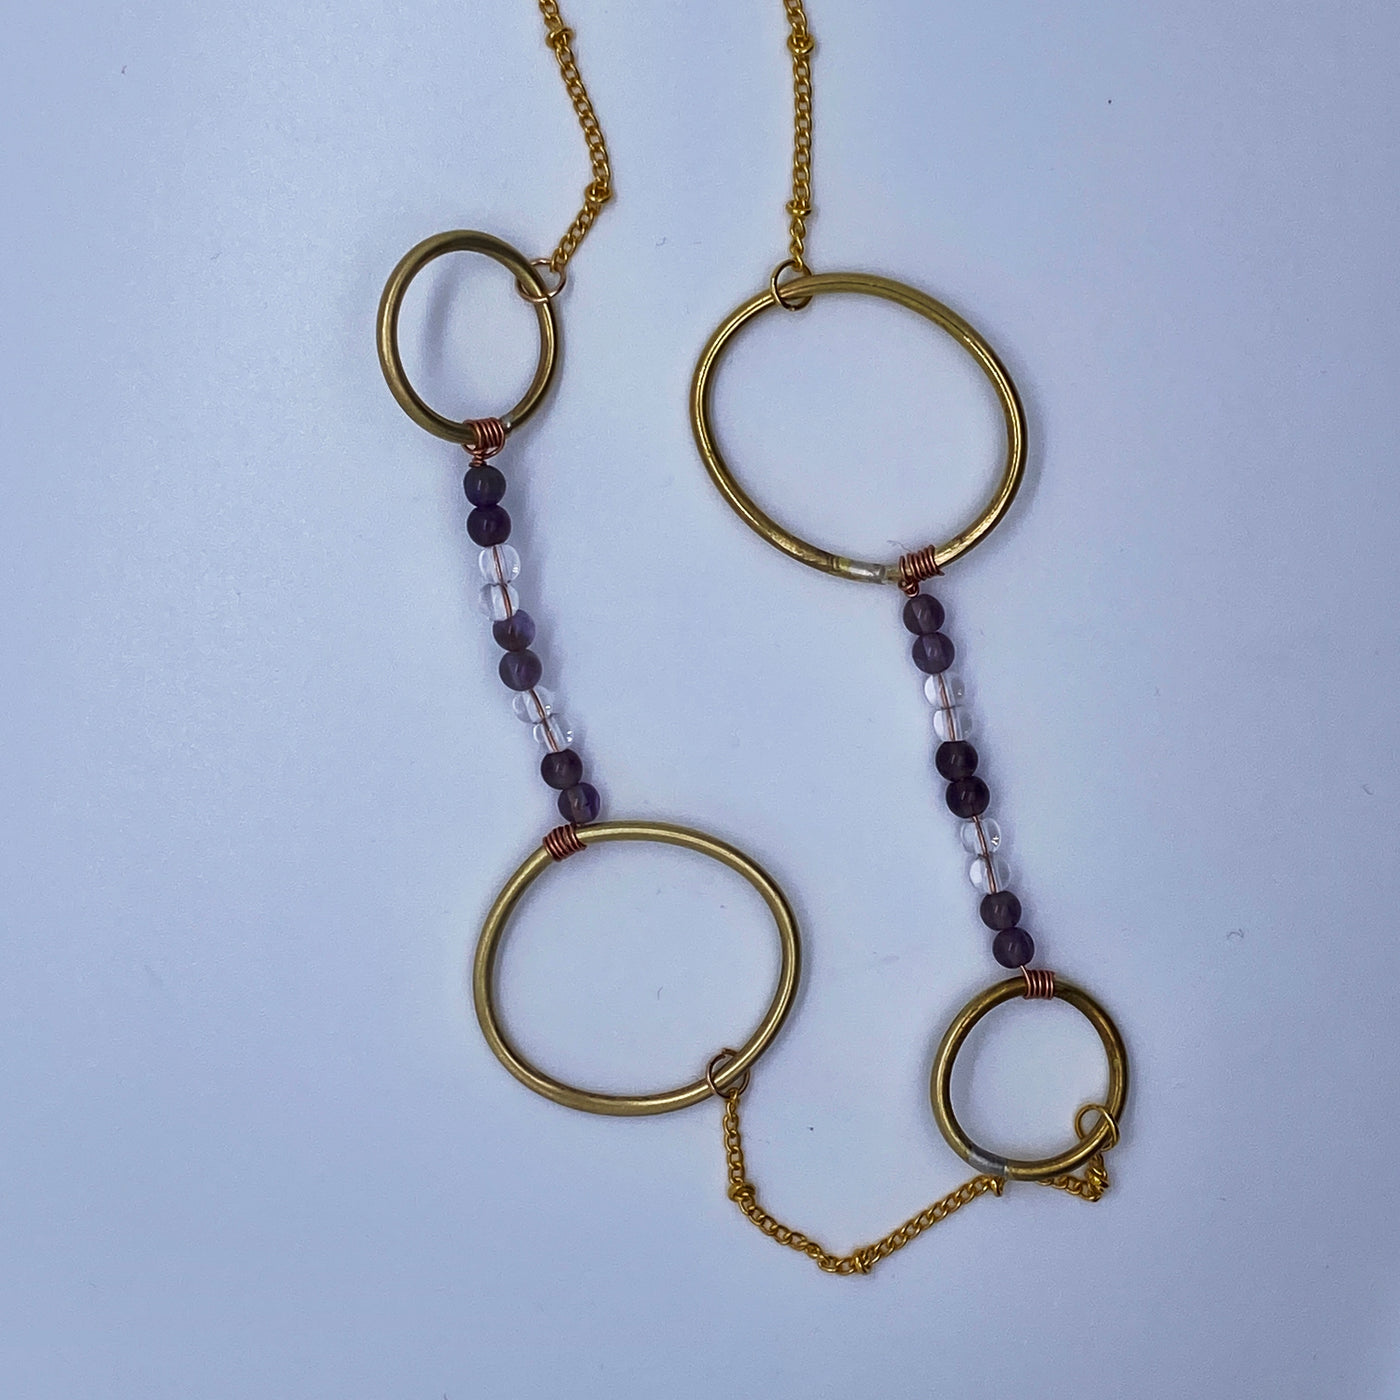 Long necklace: brass circles and ovals, amethysts and quartz